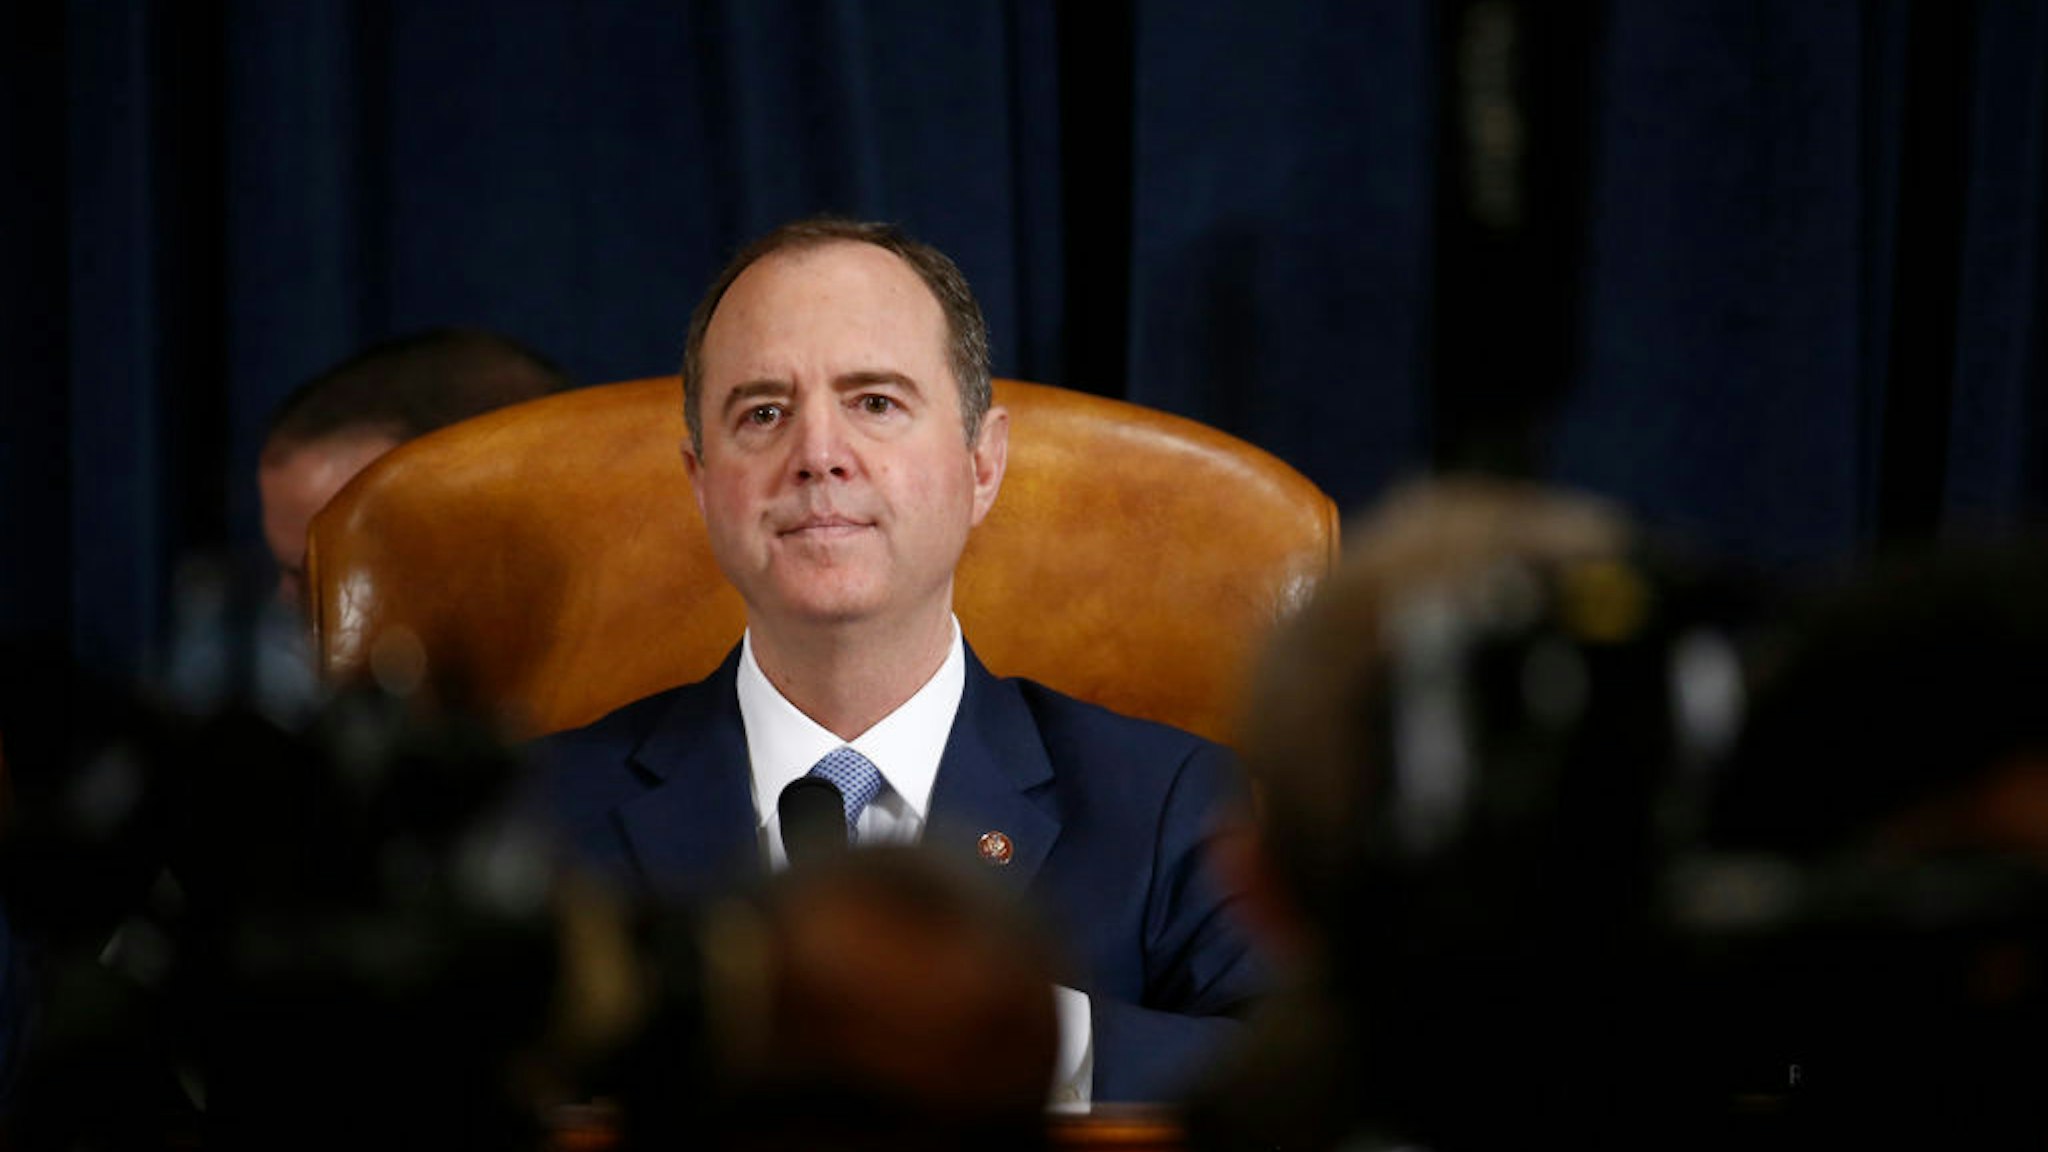 Representative Adam Schiff, a Democrat from California and chairman of the House Intelligence Committee, arrives for an impeachment inquiry hearing in Washington, D.C., U.S., on Thursday, Nov. 21, 2019. The committee hears from nine witnesses in open hearings this week in the impeachment inquiry into President Donald Trump. Photographer: Andrew Harrer/Bloomberg